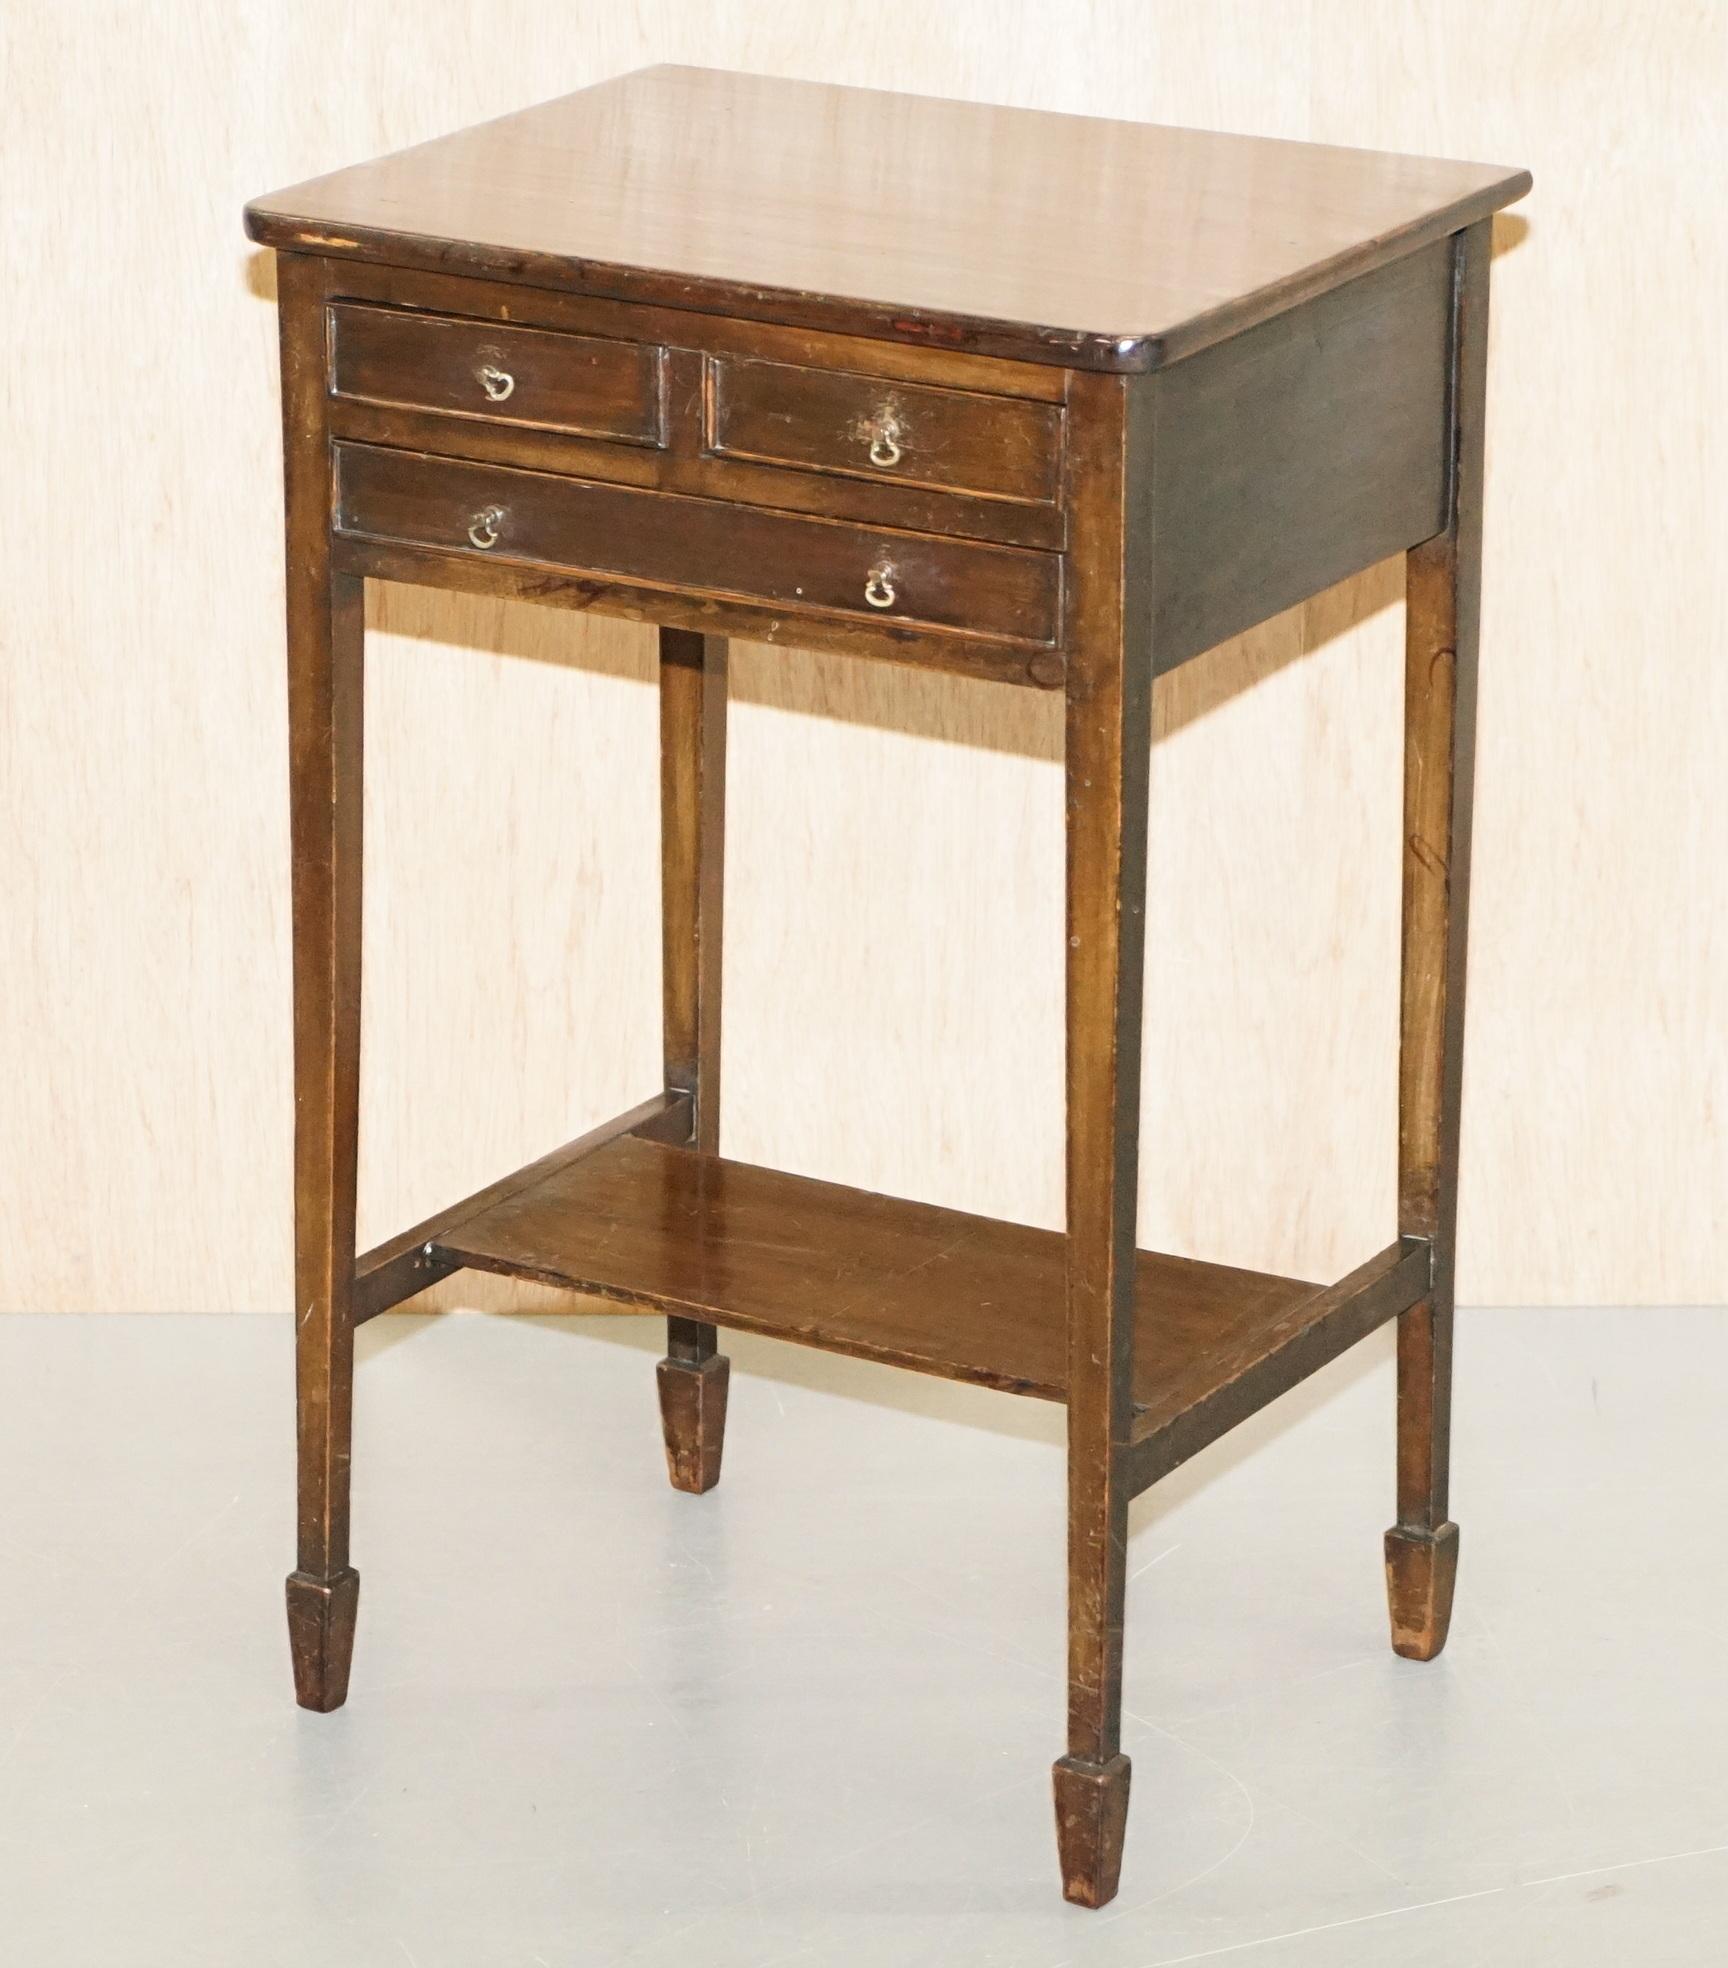 We are delighted to this lovely pair of original Victorian mahogany lamp side end tables with three drawers each

A very good looking a utilitarian pair, ideally suited for lamps with nice picture frames, the three drawers are shallow enough that